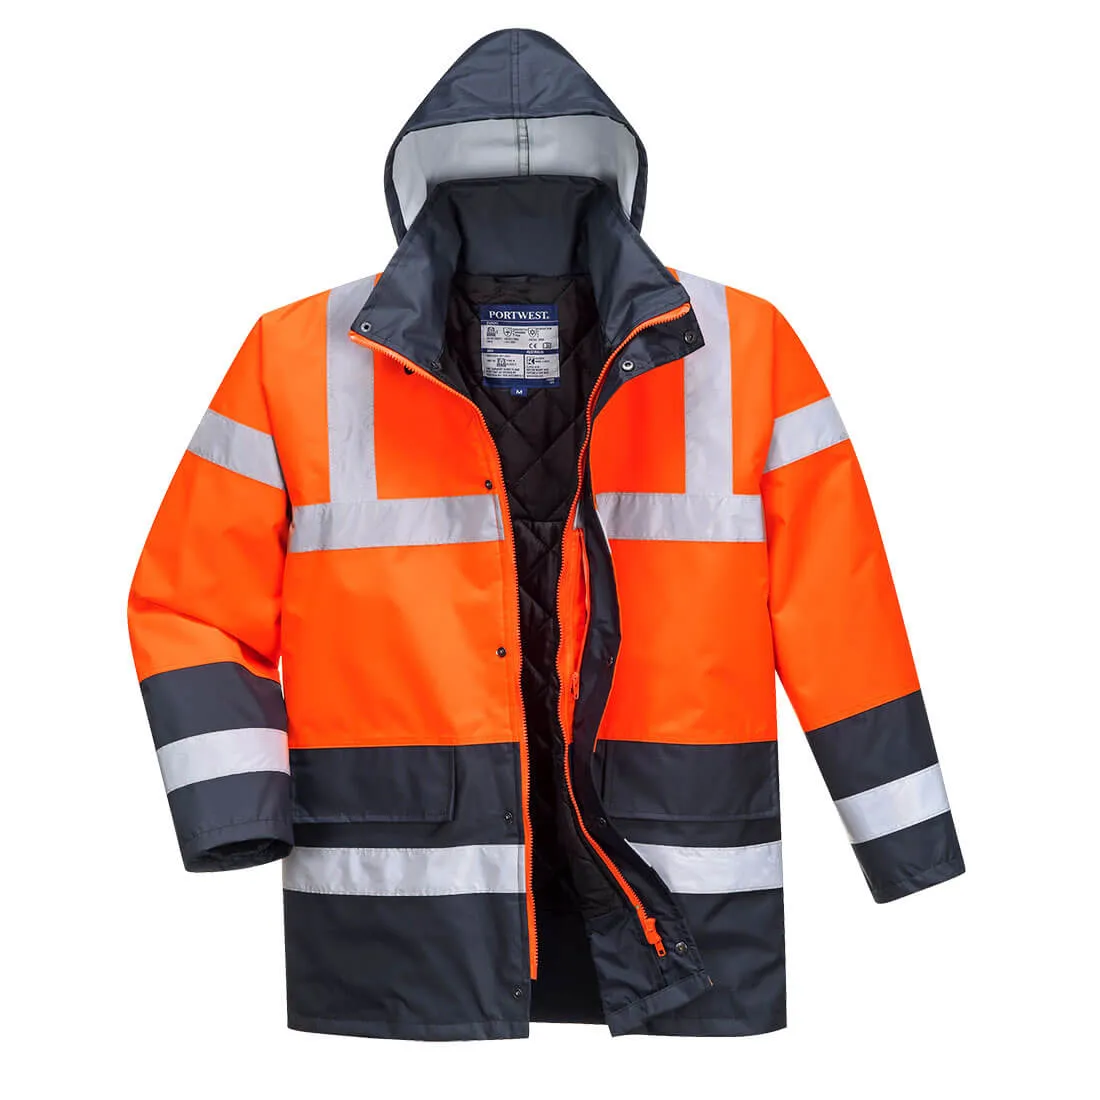 Oxford Weave 300D Class 3 Hi Vis Contrast Traffic Jacket - Red / Navy, S